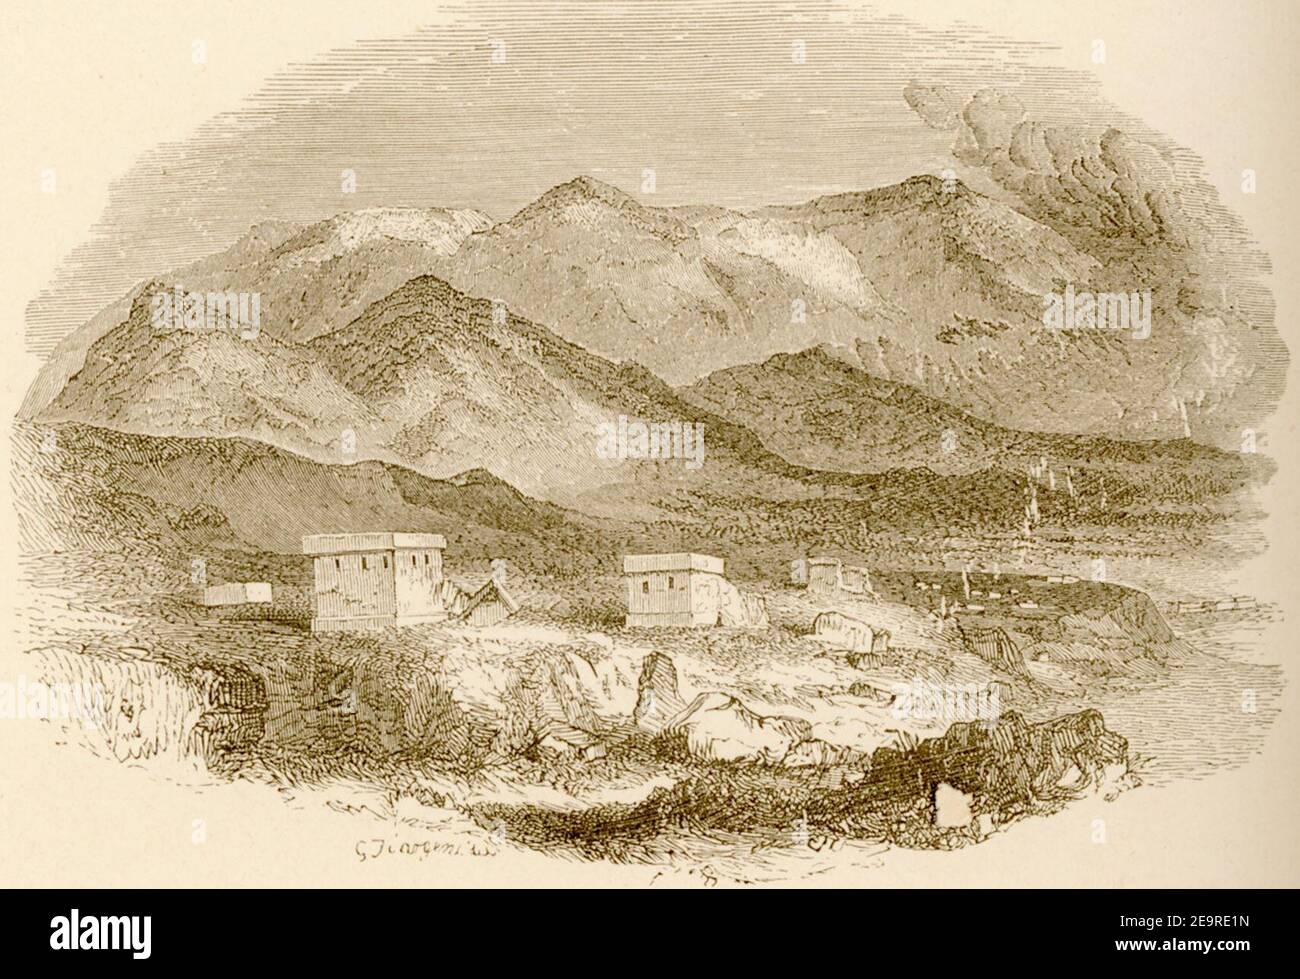 Mount Cithaeron and Tombs at Platea - Wordsworth Christopher - 1882. Stock Photo